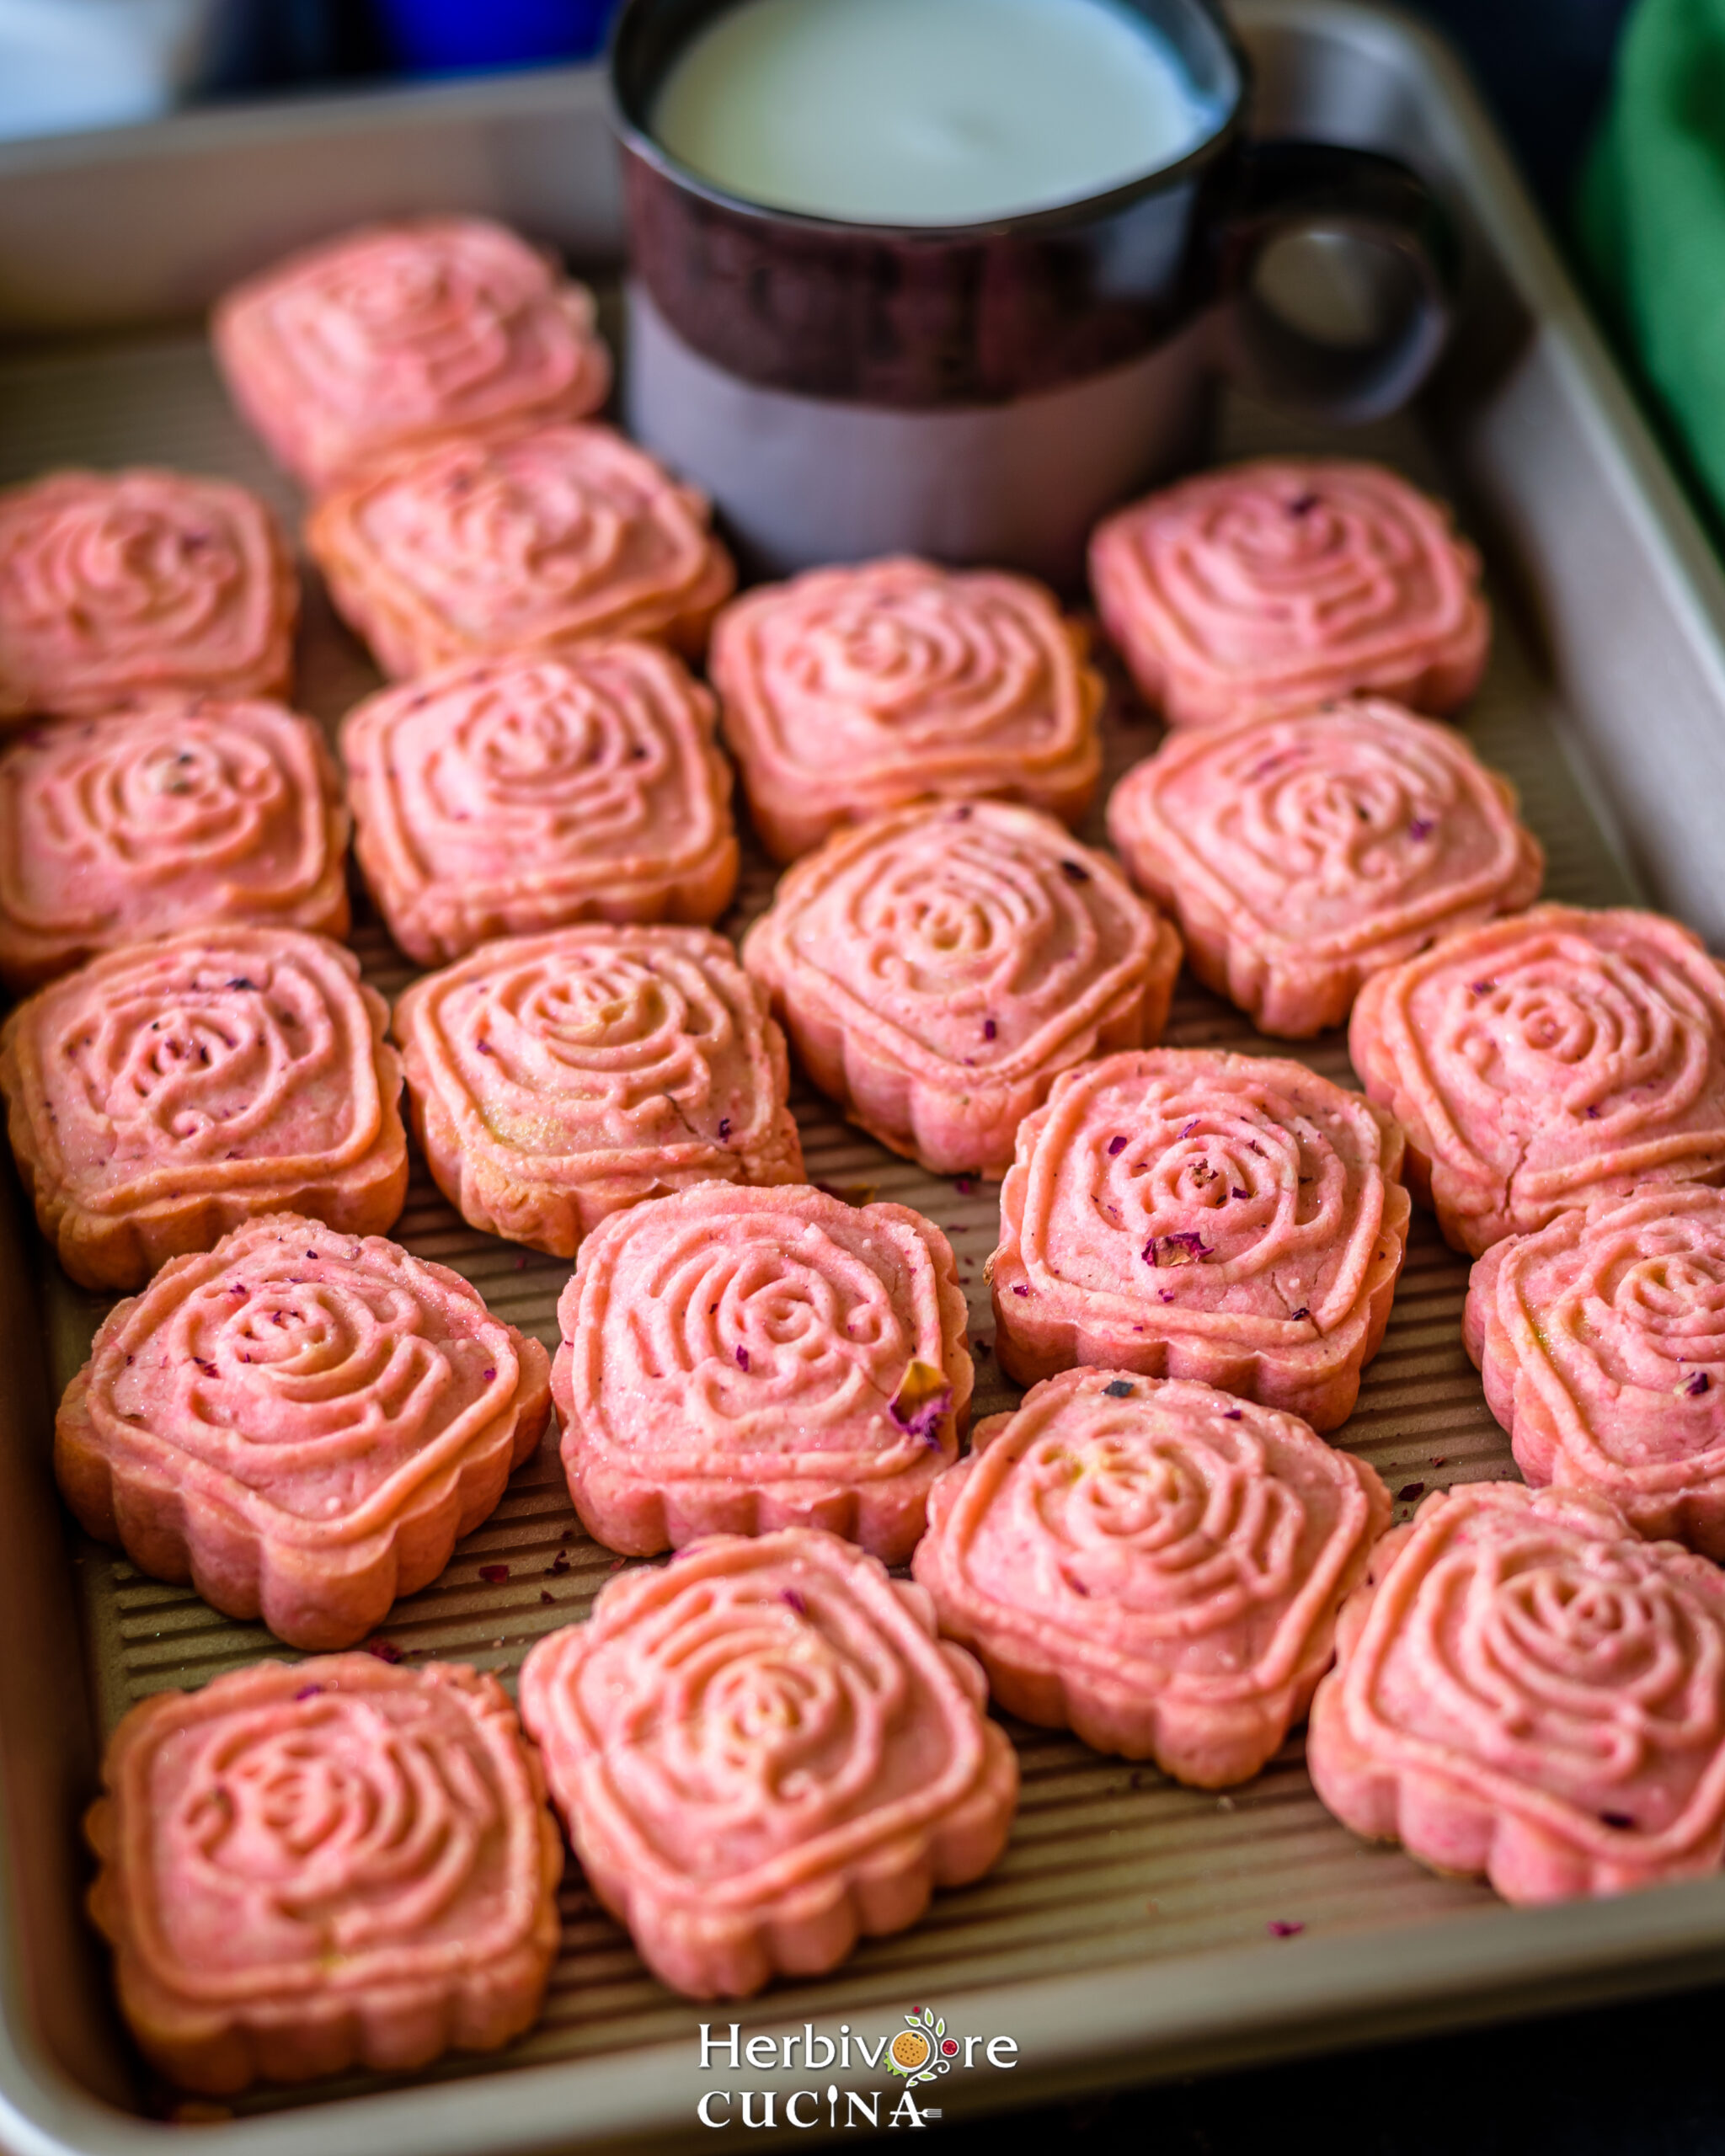 Rose cookies in a baking tray with a glass of milk on the side.  